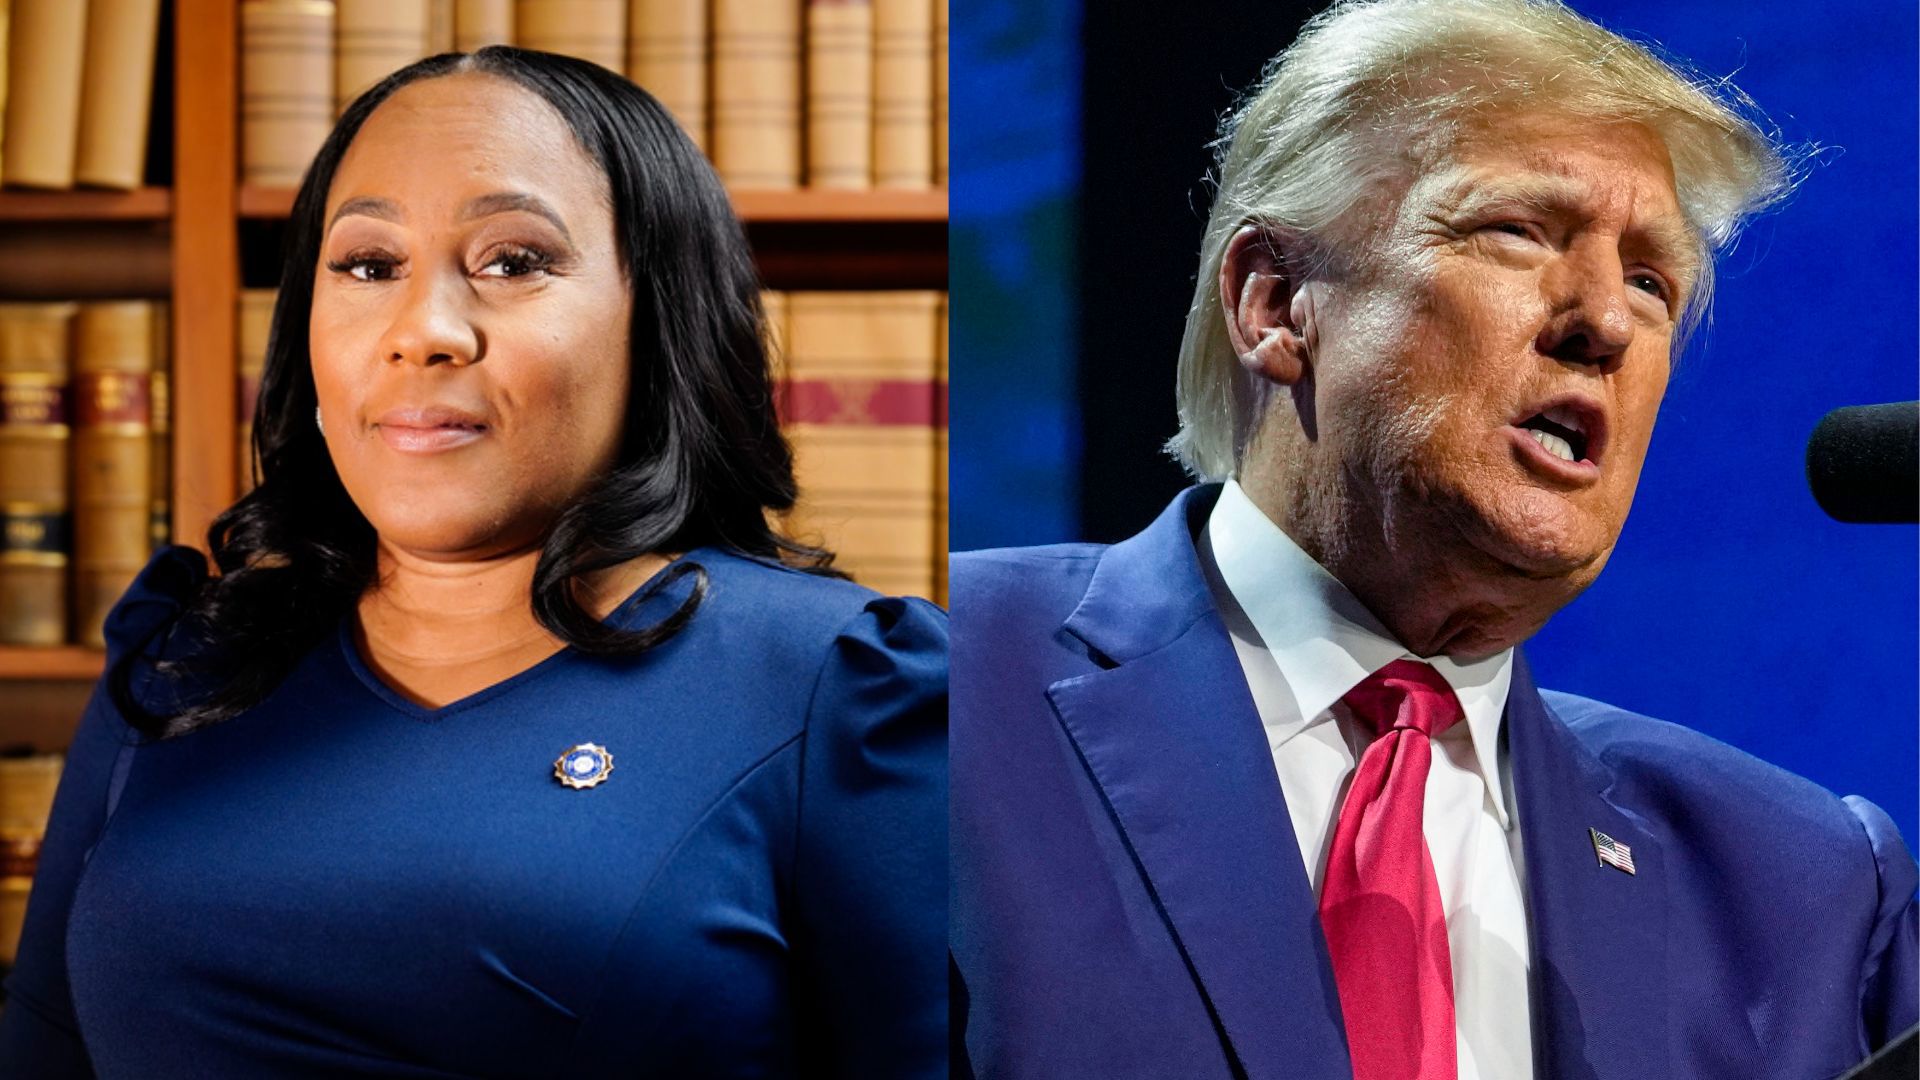 Fulton County District Attorney Fani Willis wants a March 2024 trial date for Donald Trump and 18 co-defendants in her 2020 election interference case.